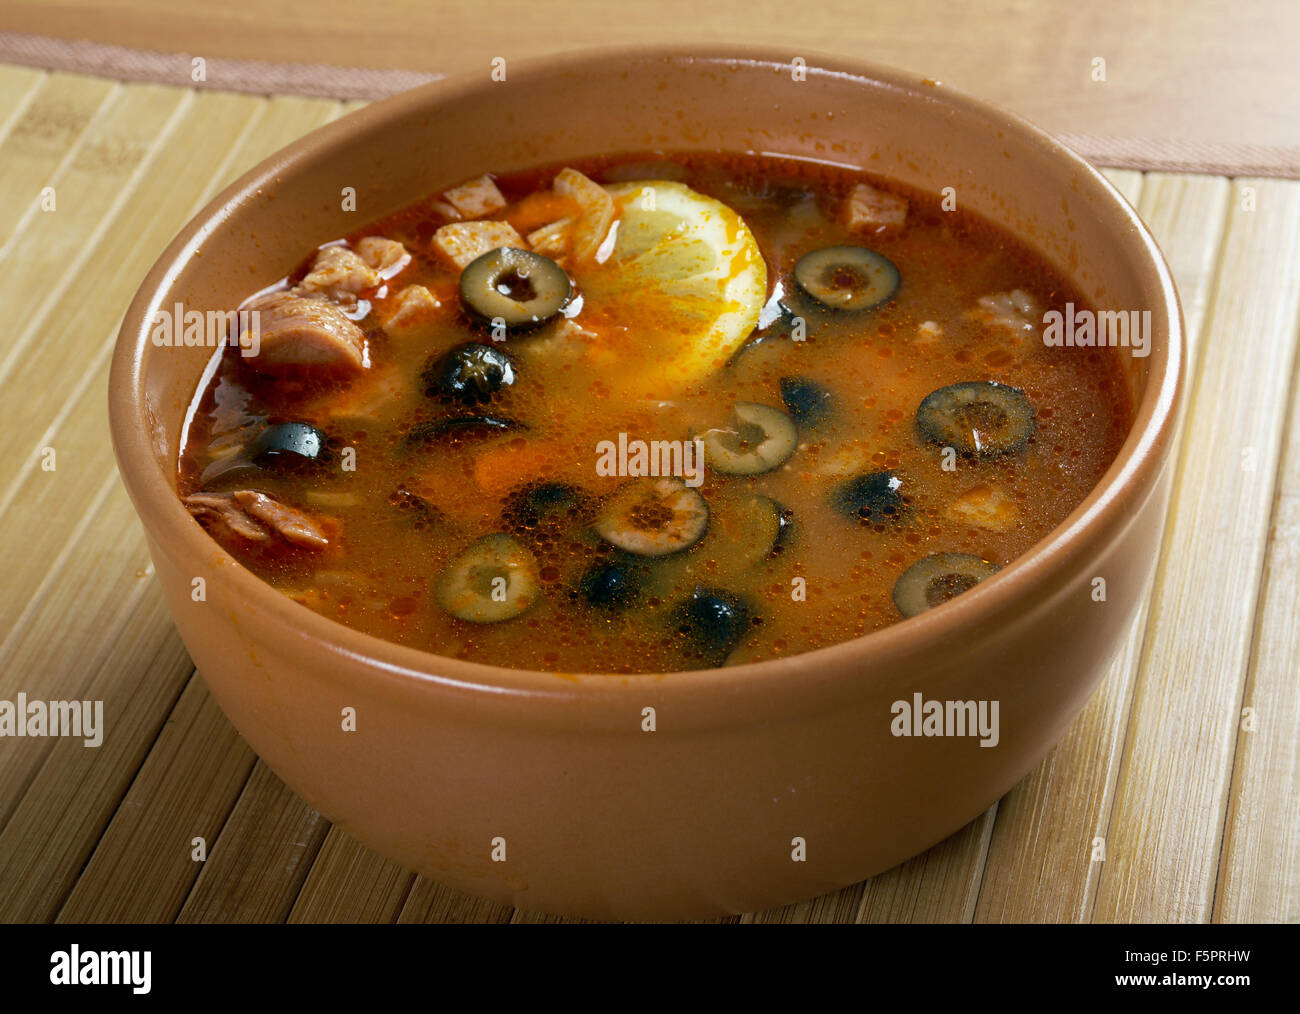 Solyanka on the plate.Solyanka, Russian soup with beef,sausage,chicken and lemon, olives Stock Photo